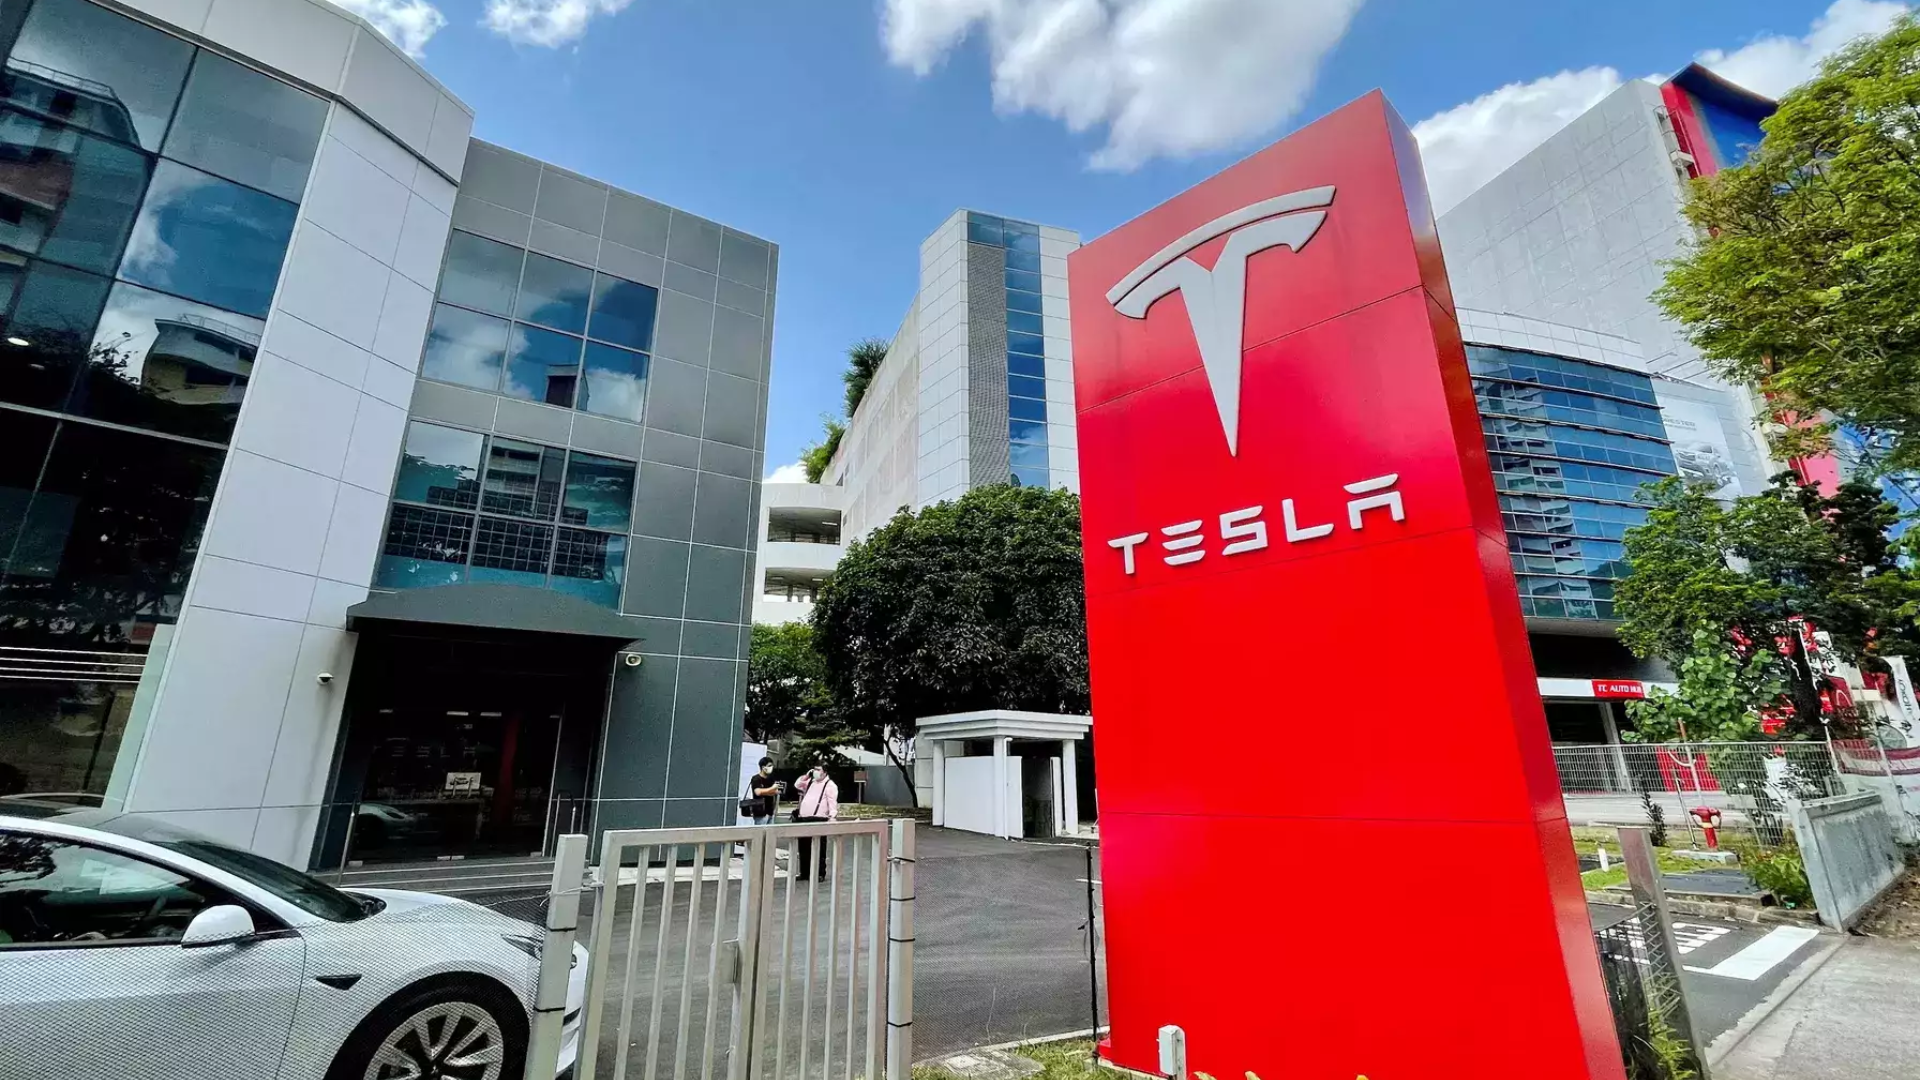 Tesla’s Ambitious Moves in India: Potential Factory Setup and New Car Development for Developing Nations